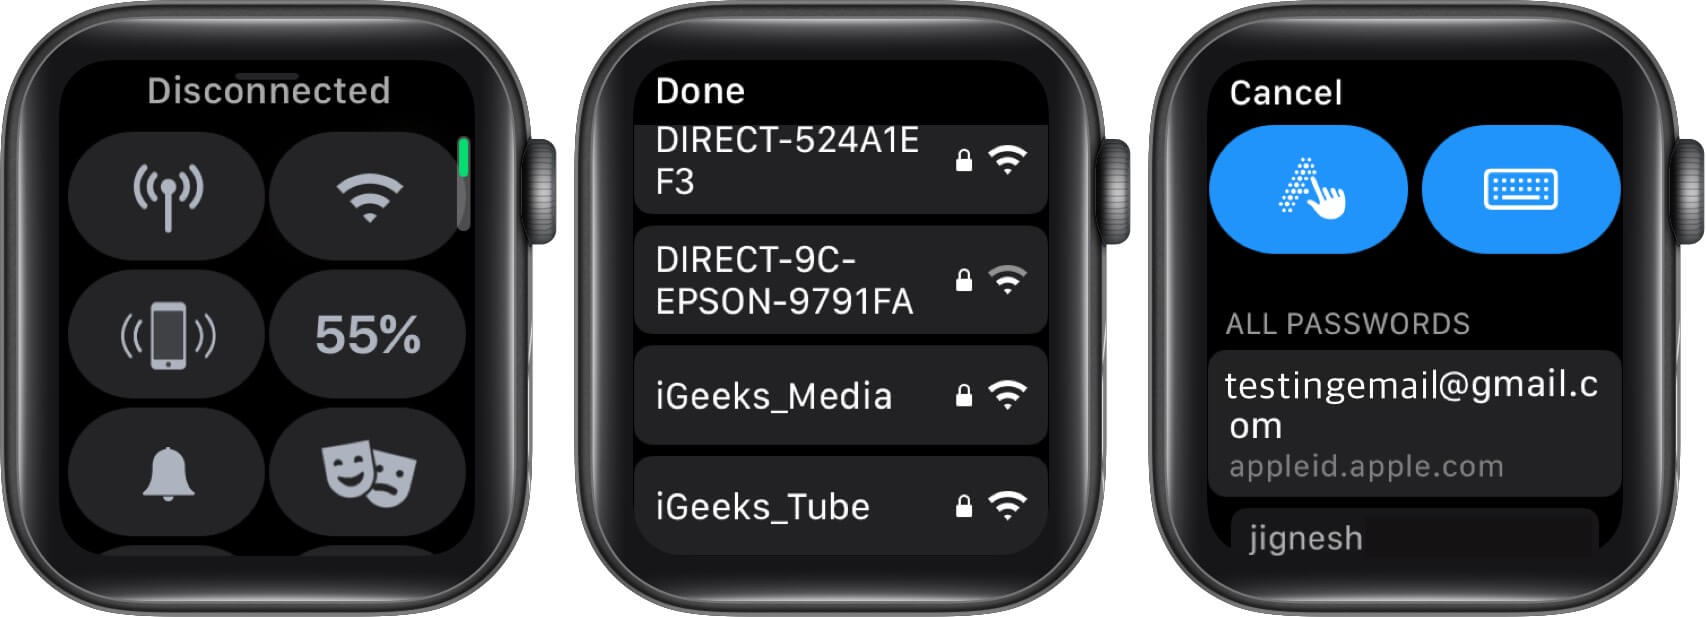 Turn Off Wi-Fi and Reconnect with Same Wi-Fi on Apple Watch